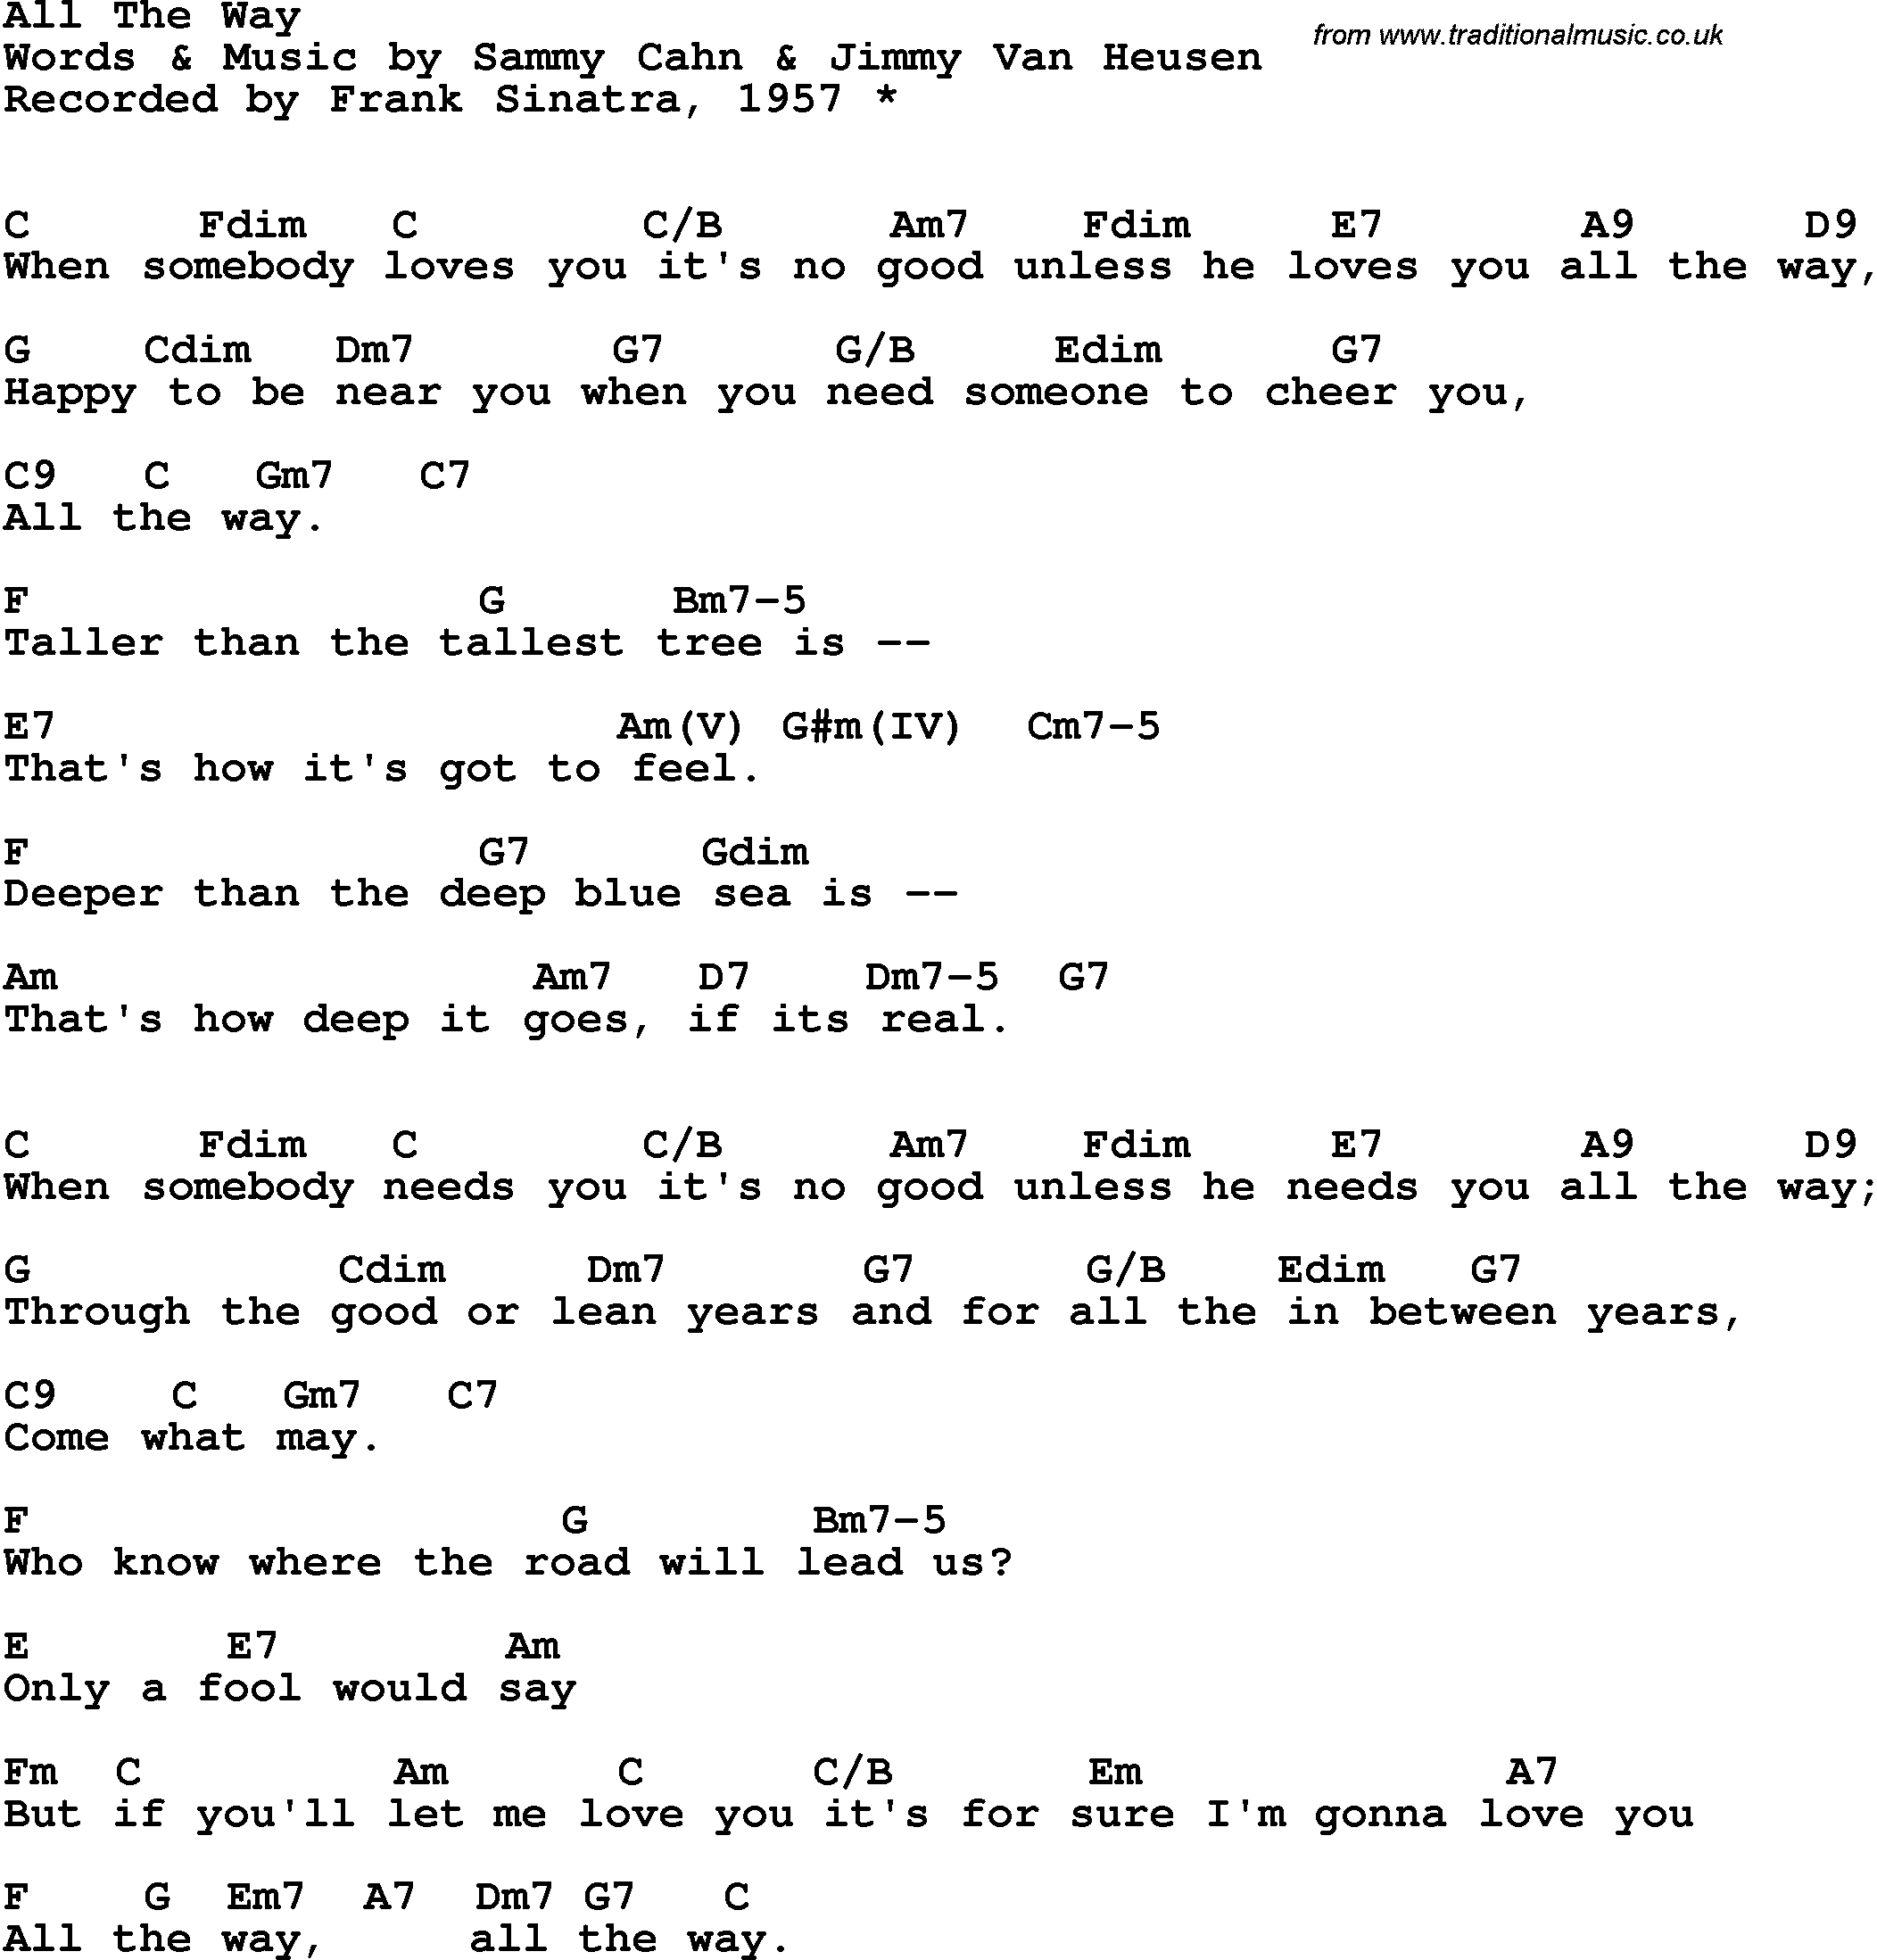 Song Lyrics with guitar chords for All The Way - Frank Sinatra, 1957